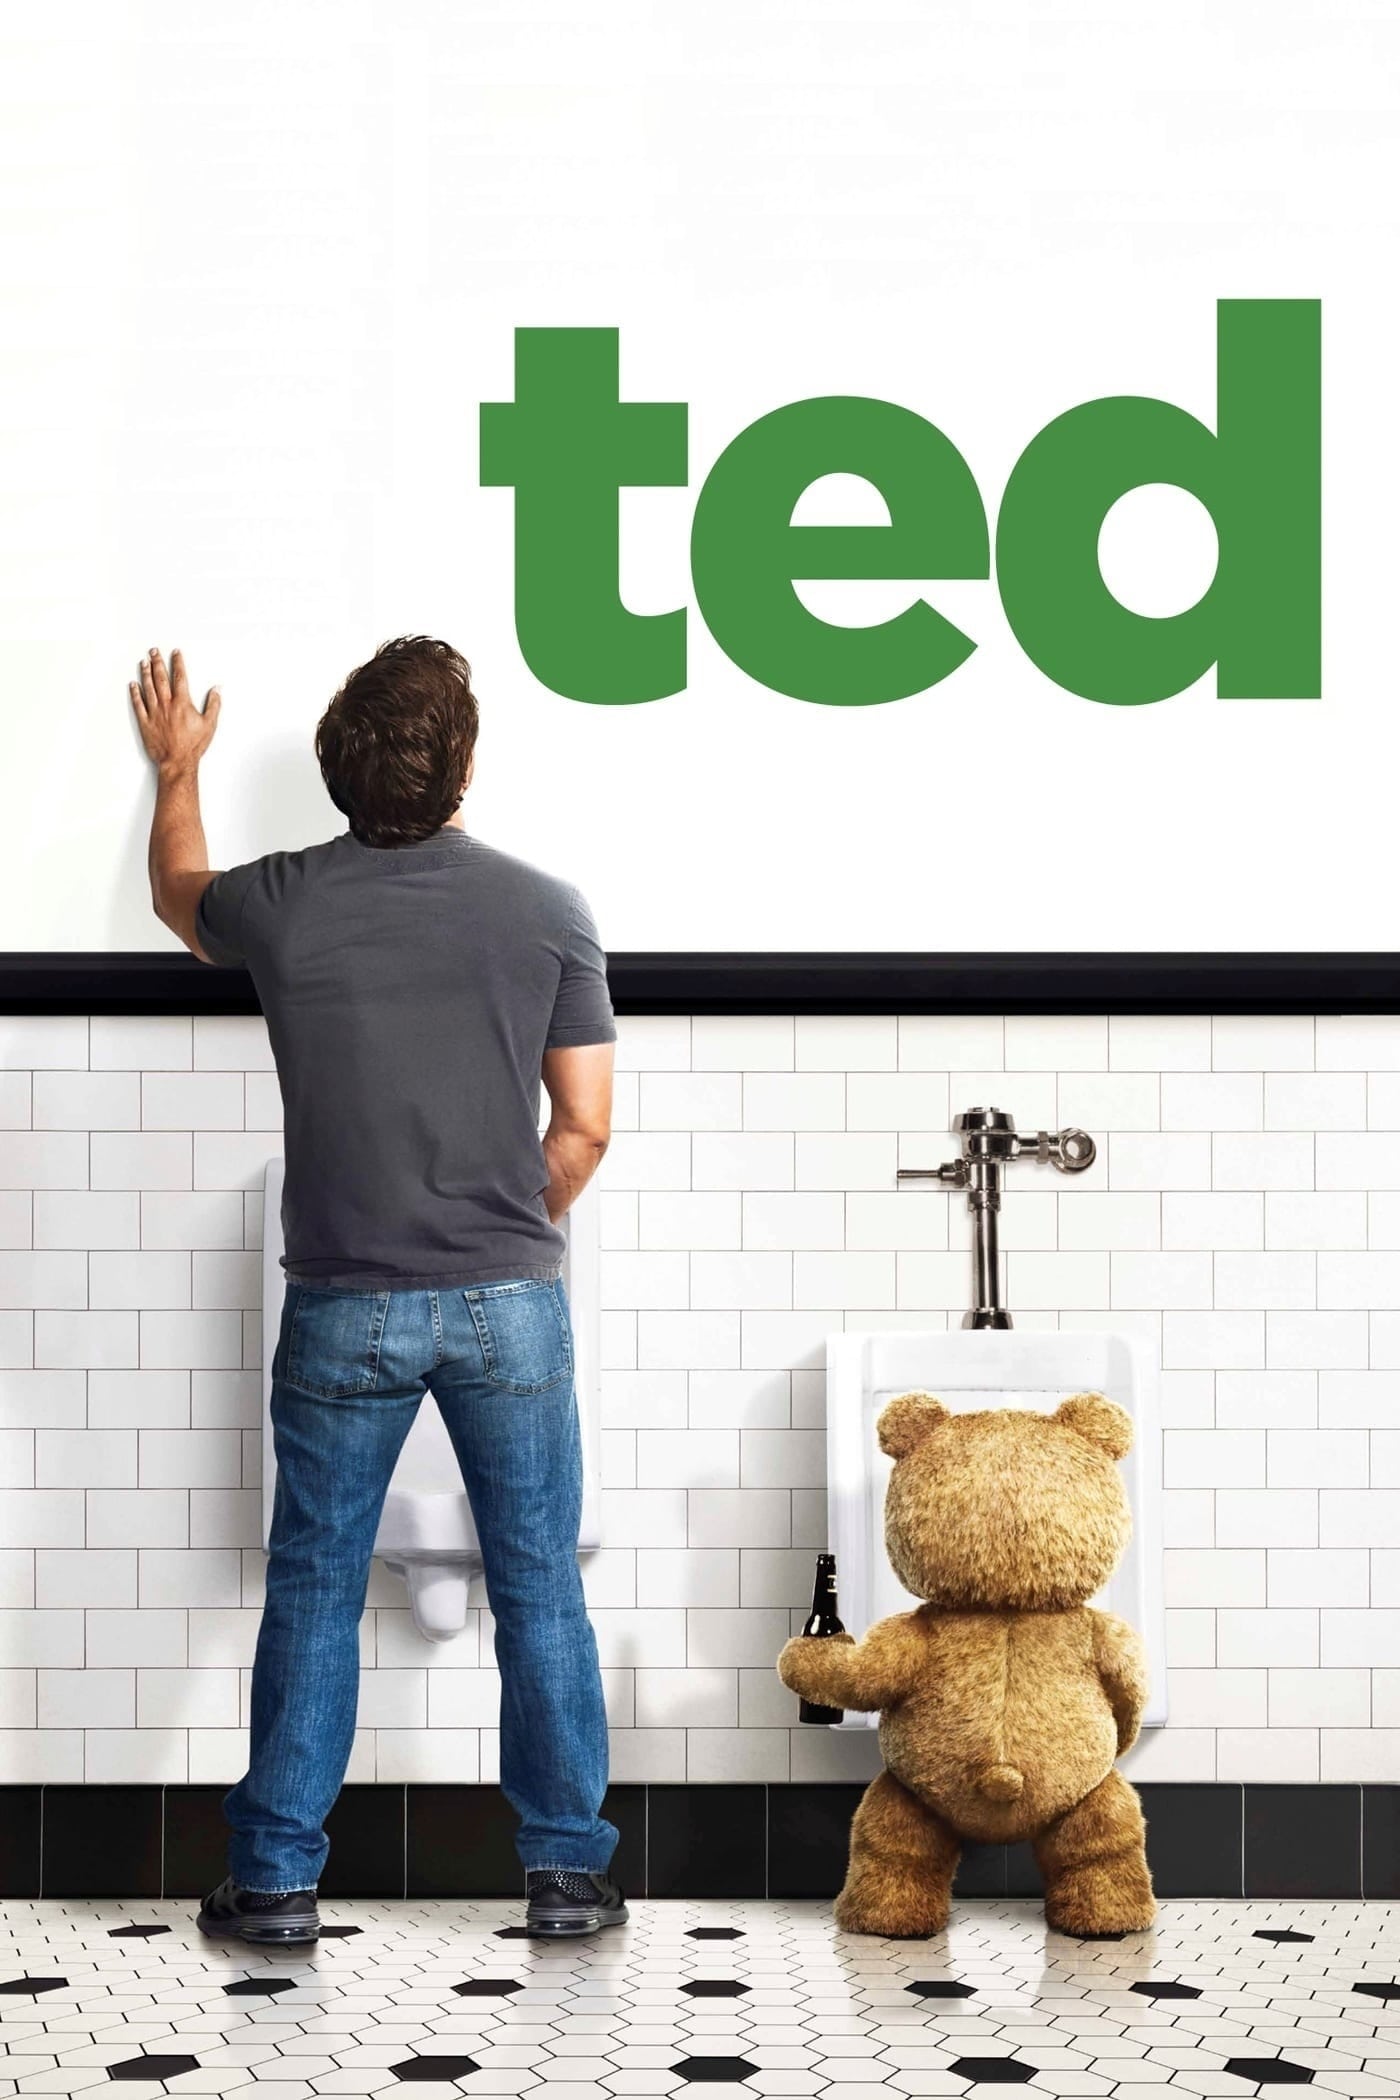 Ted Picture